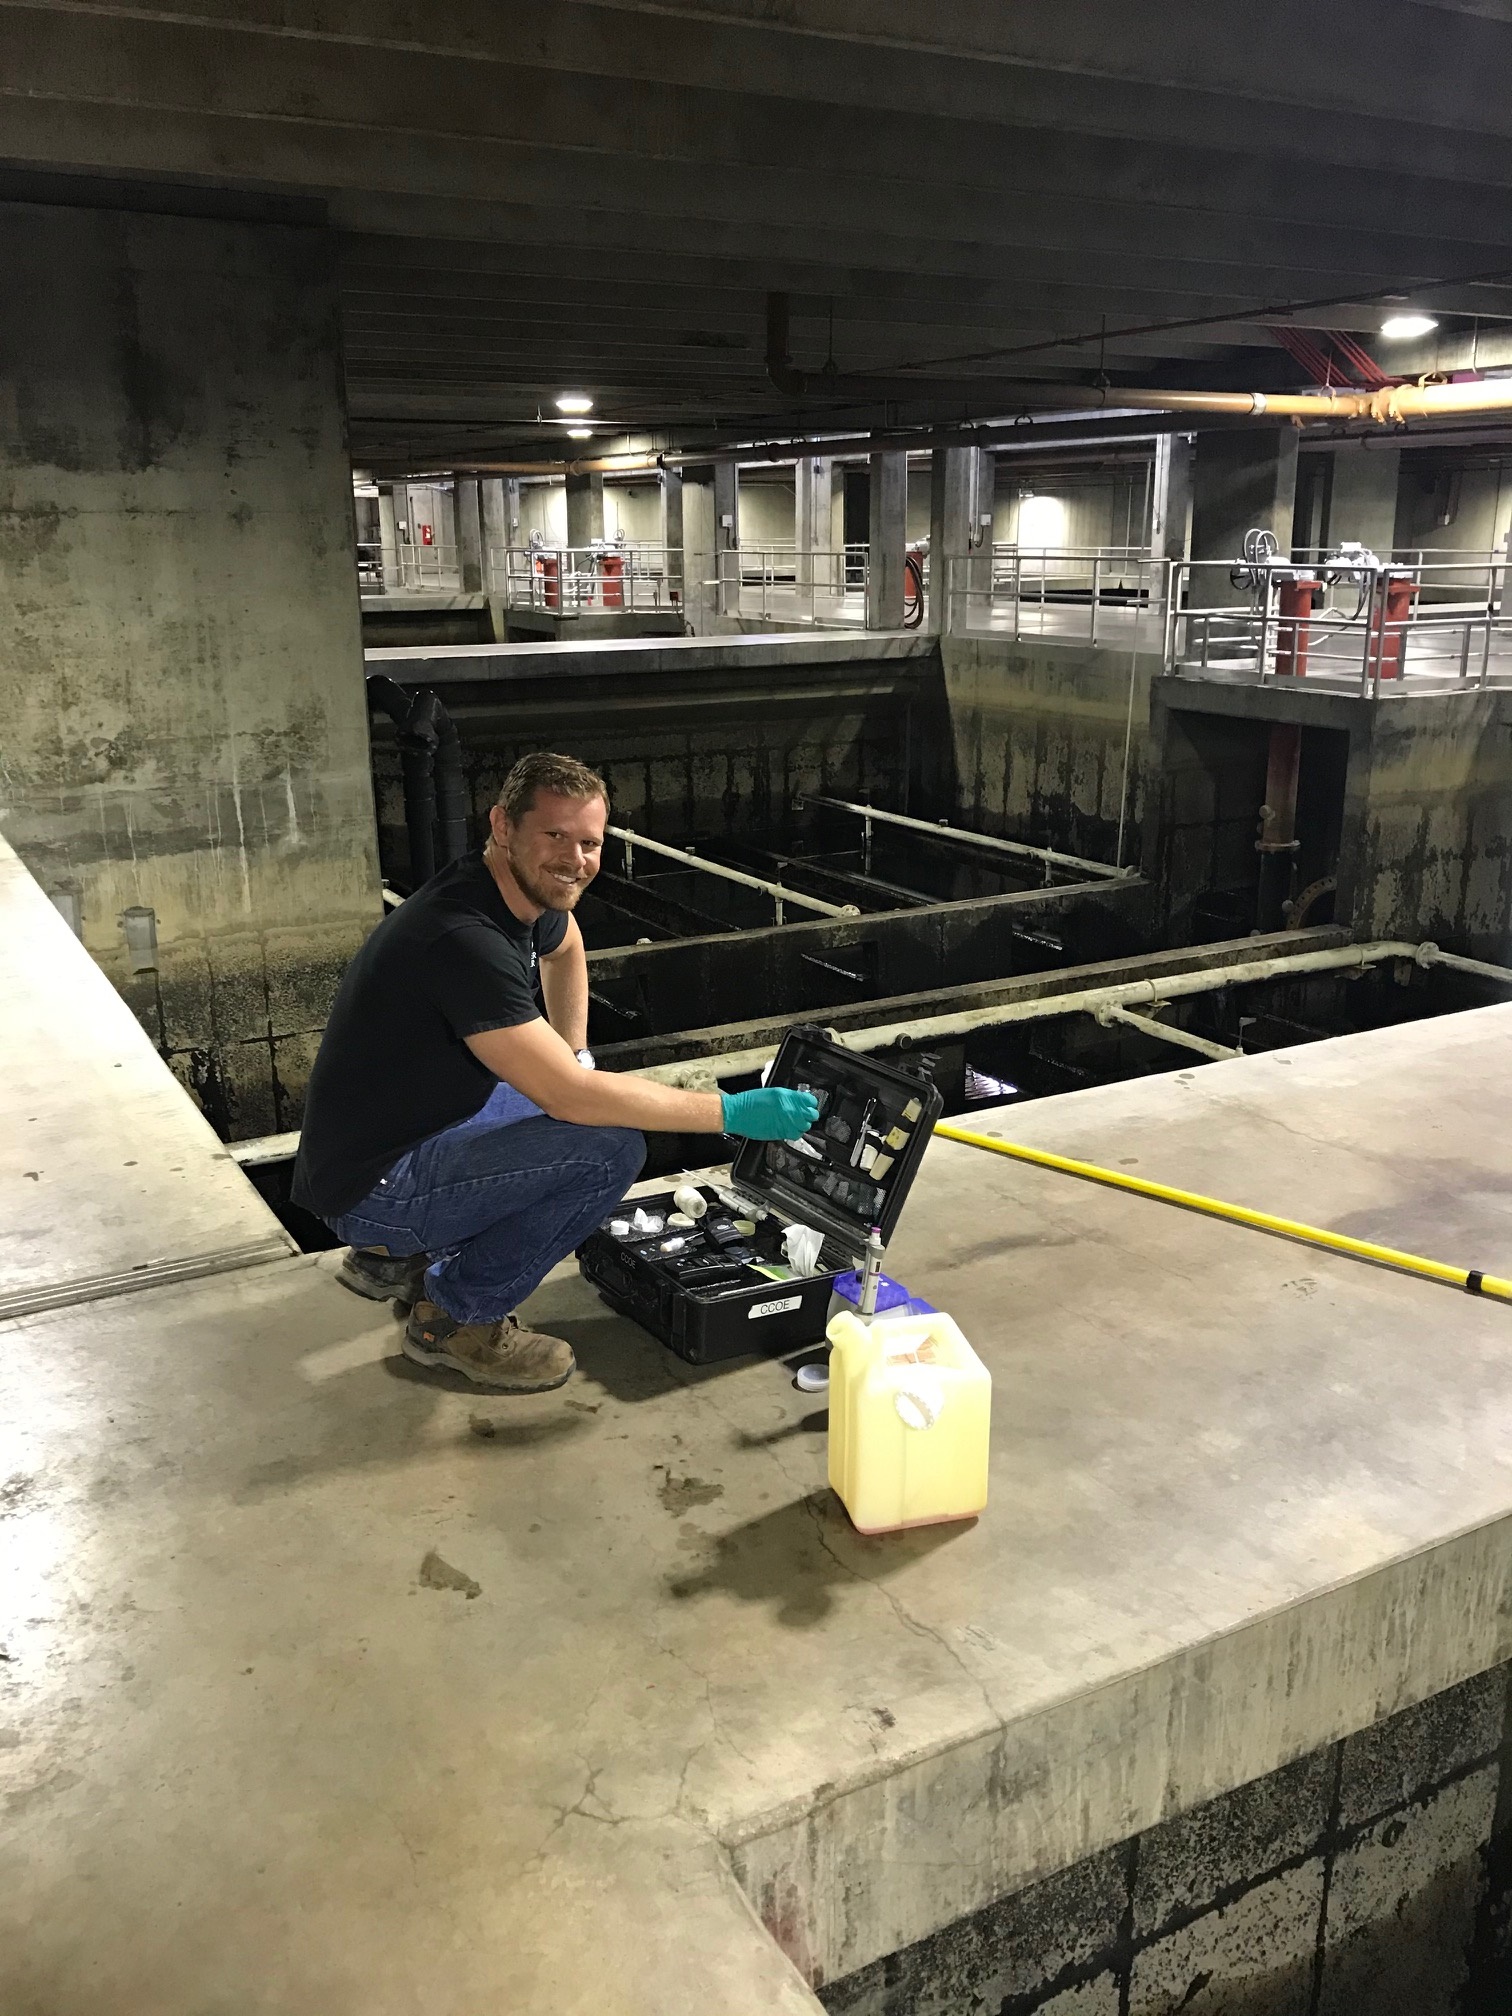 Coe is proud to work as a water quality tech at Denver Water. He knows he is following his life’s calling to provide a safe water supply for the people he serves.